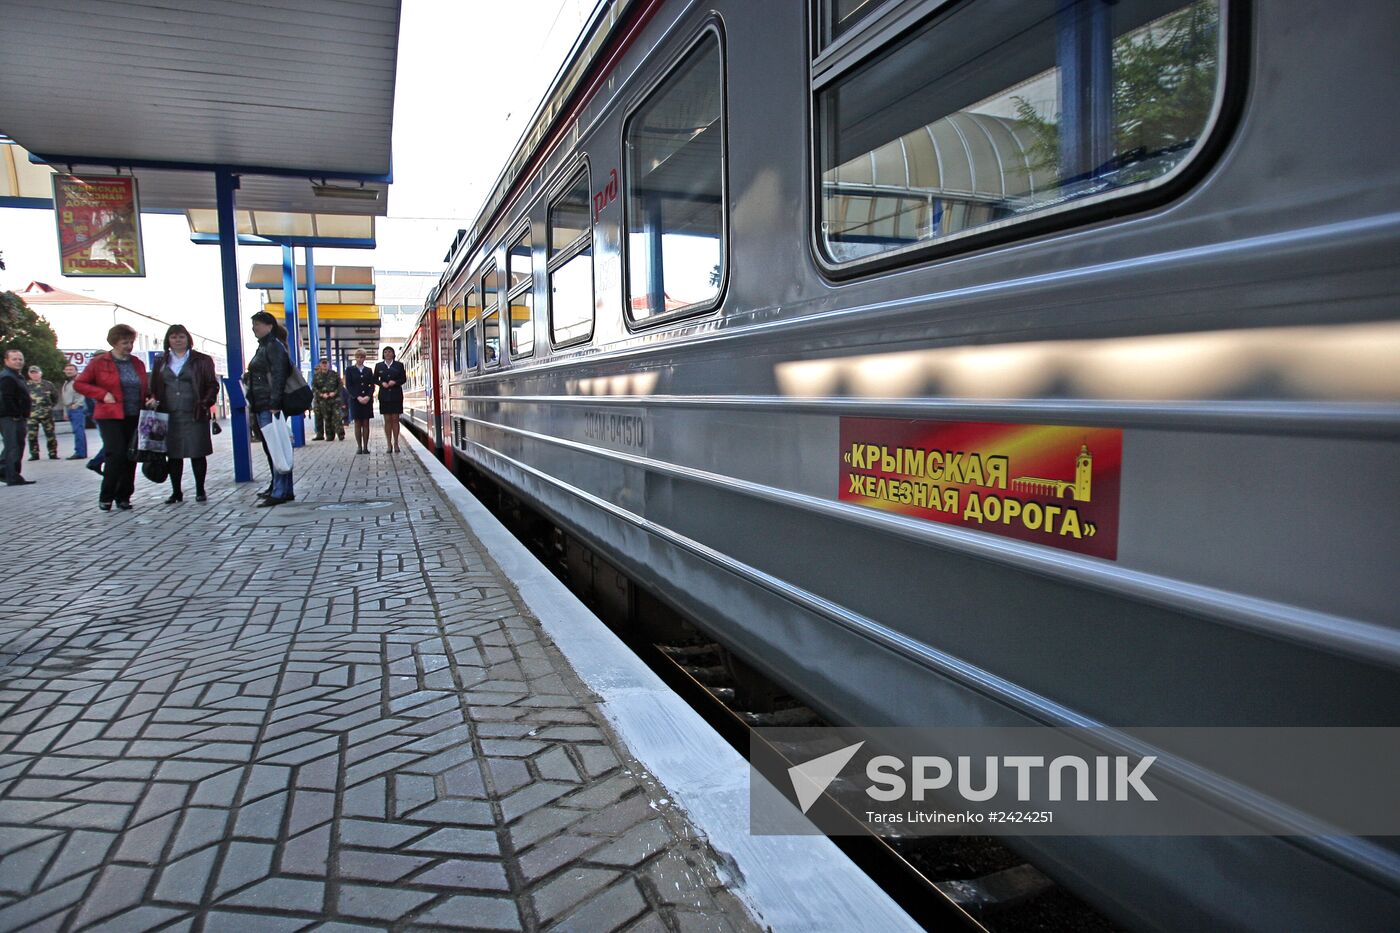 New electric train handed over to Crimea by Russian railroaders